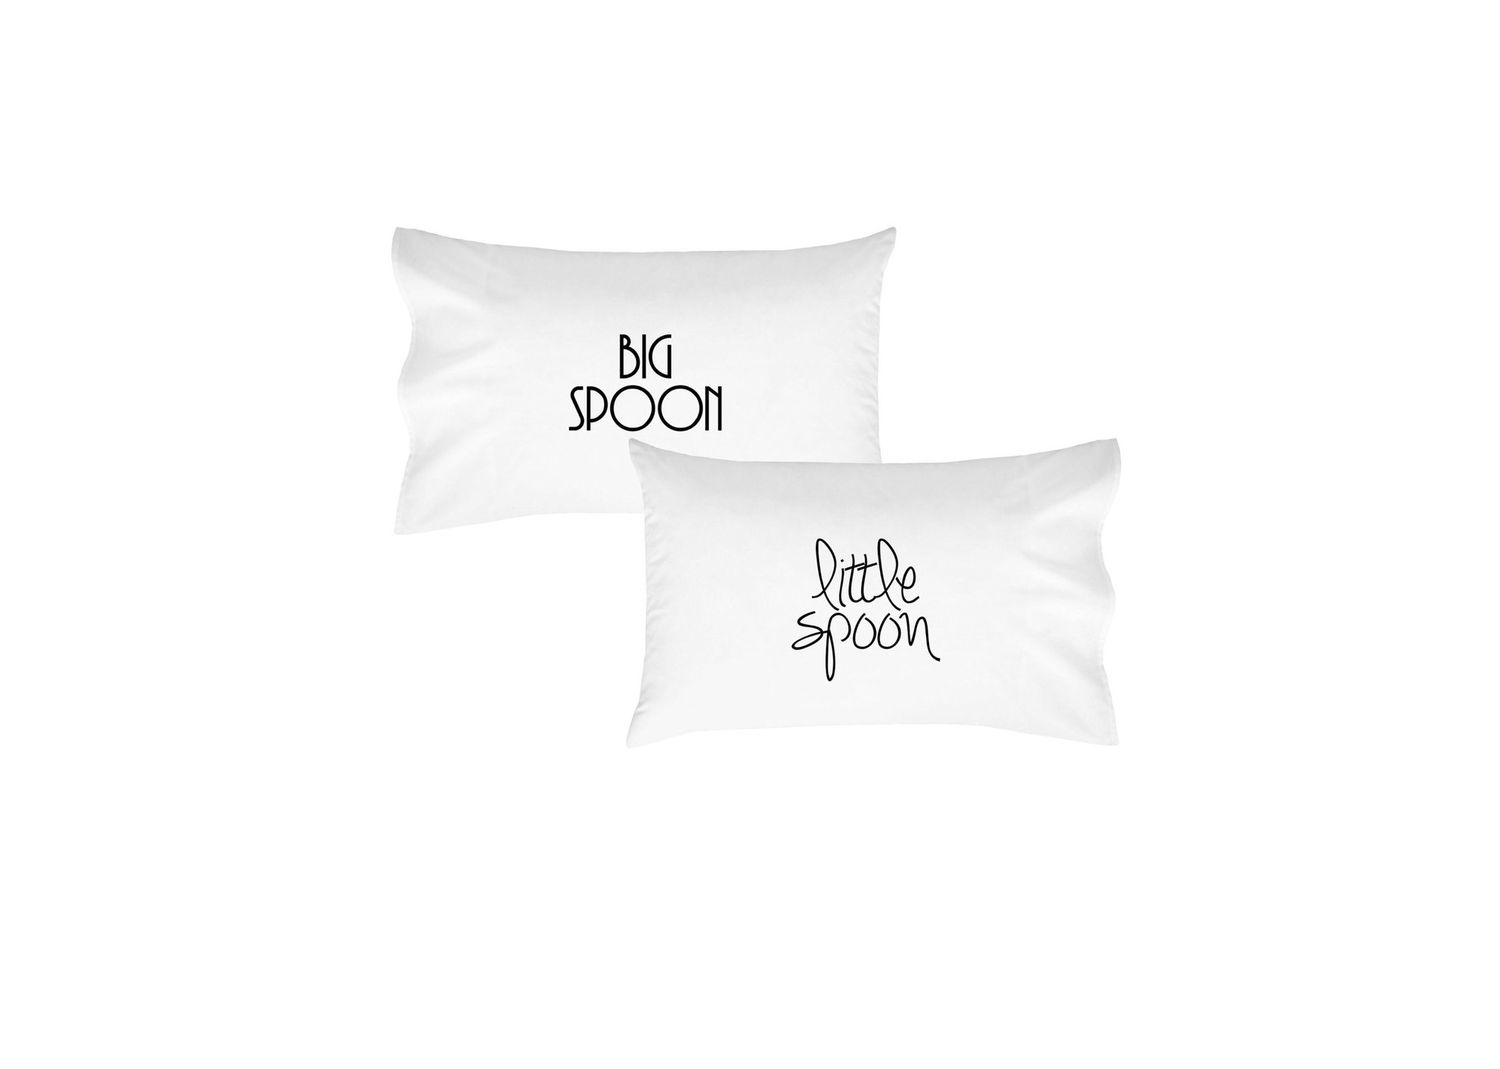 His and Hers Pillowcases